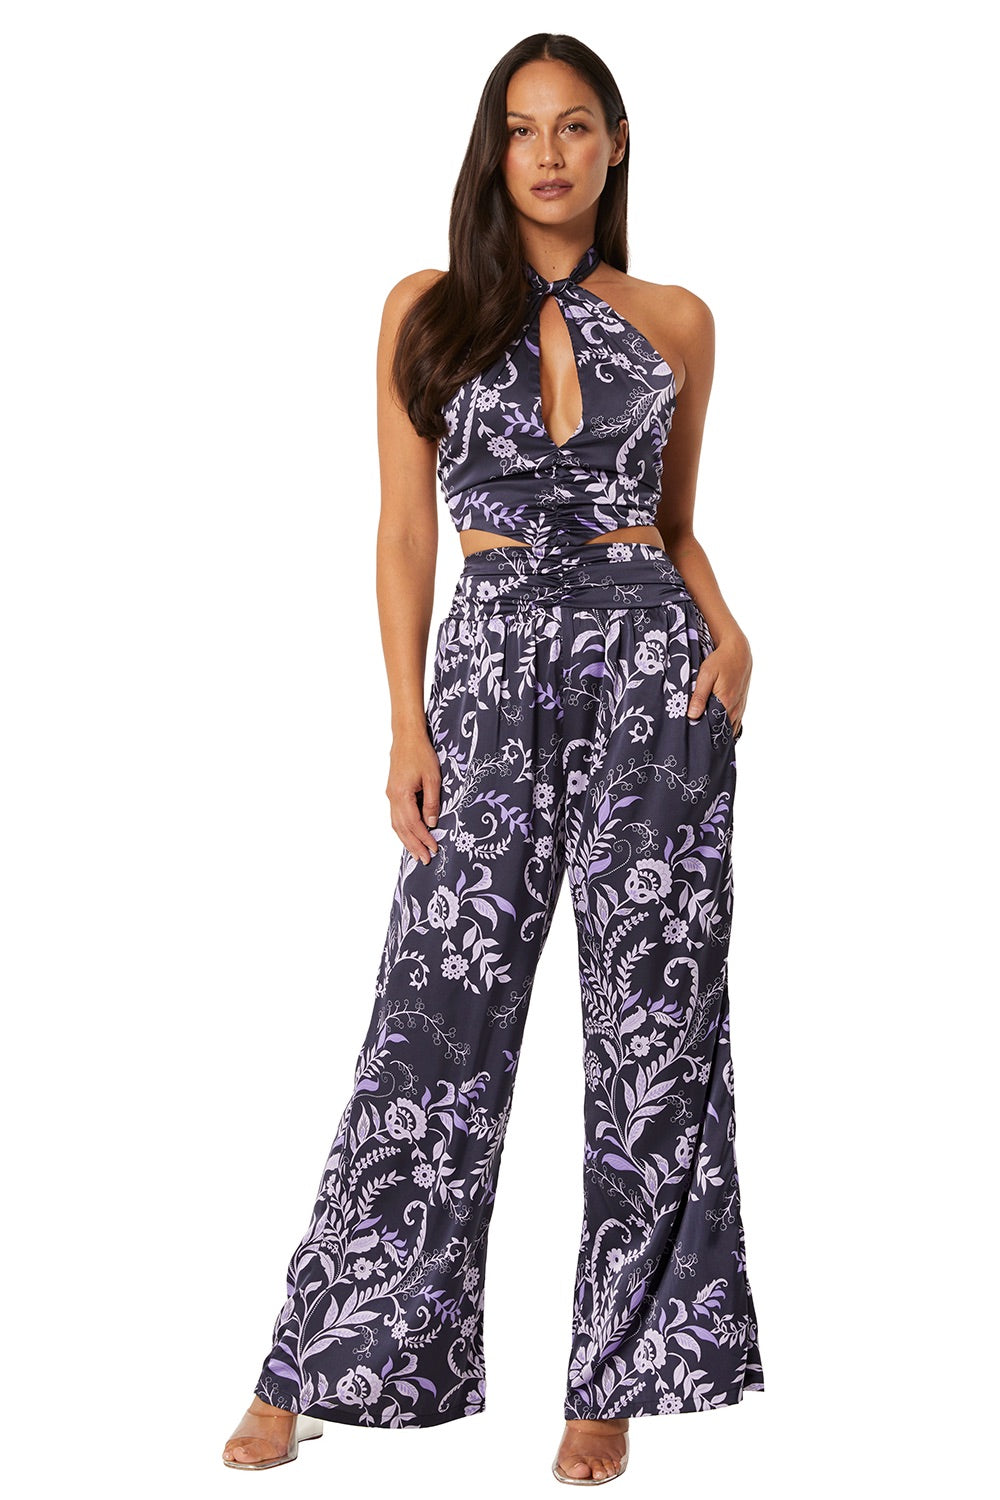 MISA Los Angeles Rompers and Jumpsuits